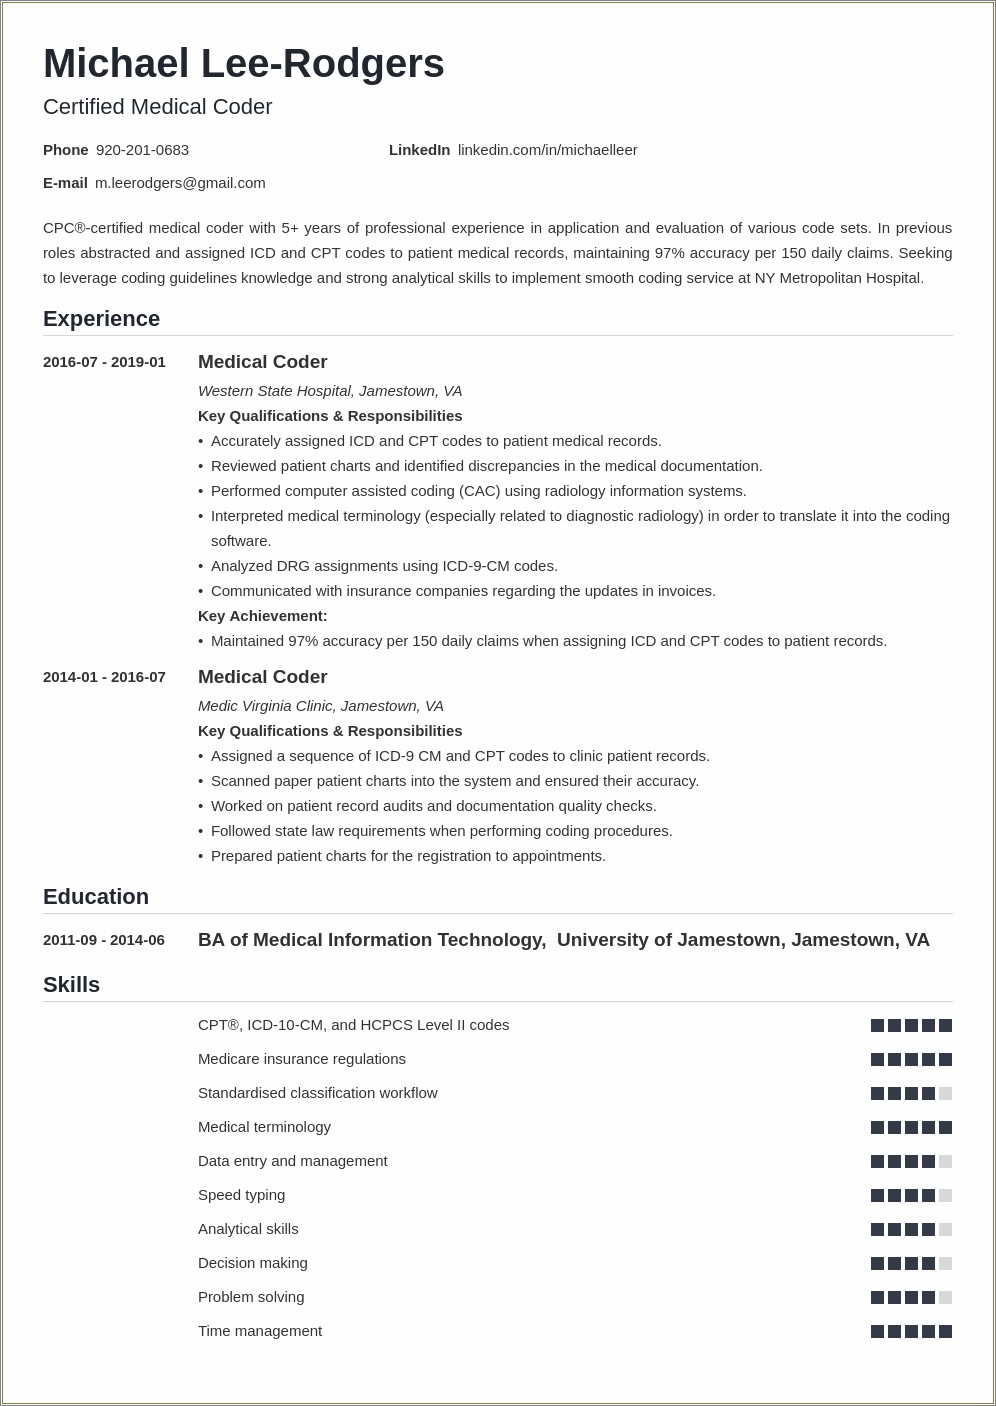 Resume For Medical Billing With Experience